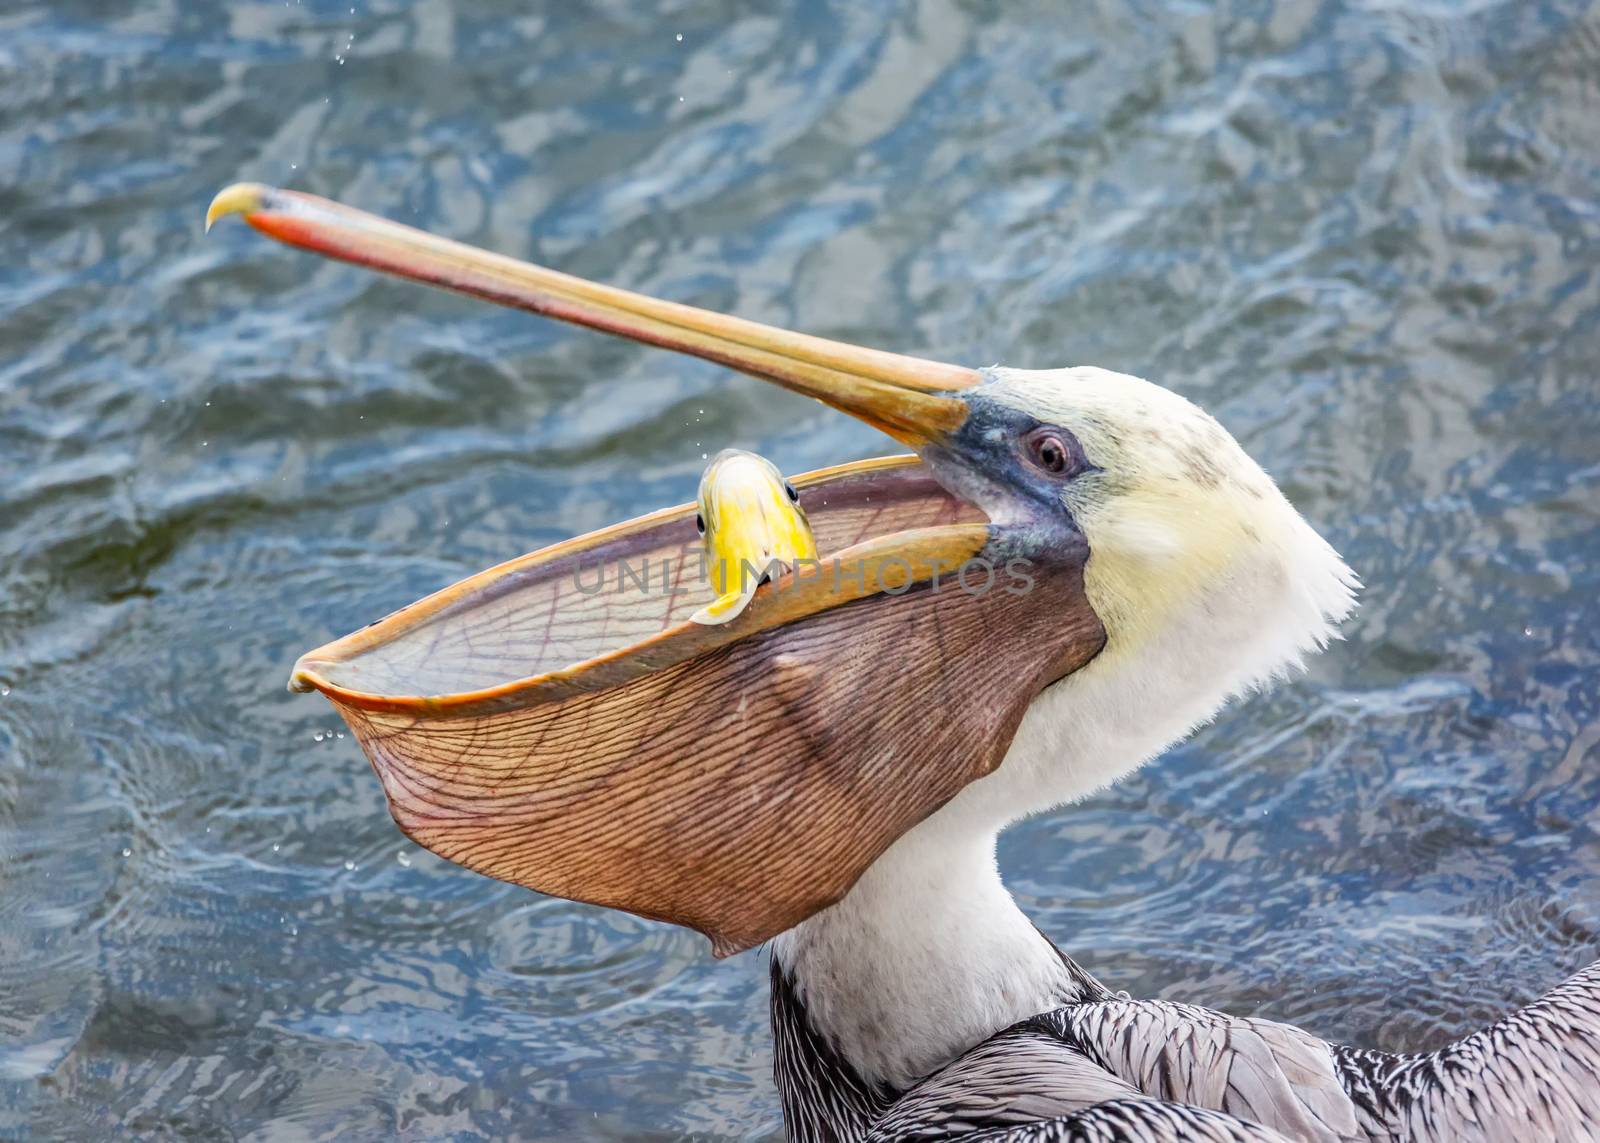 A Pelican Eating a Fish for Lunch by backyard_photography